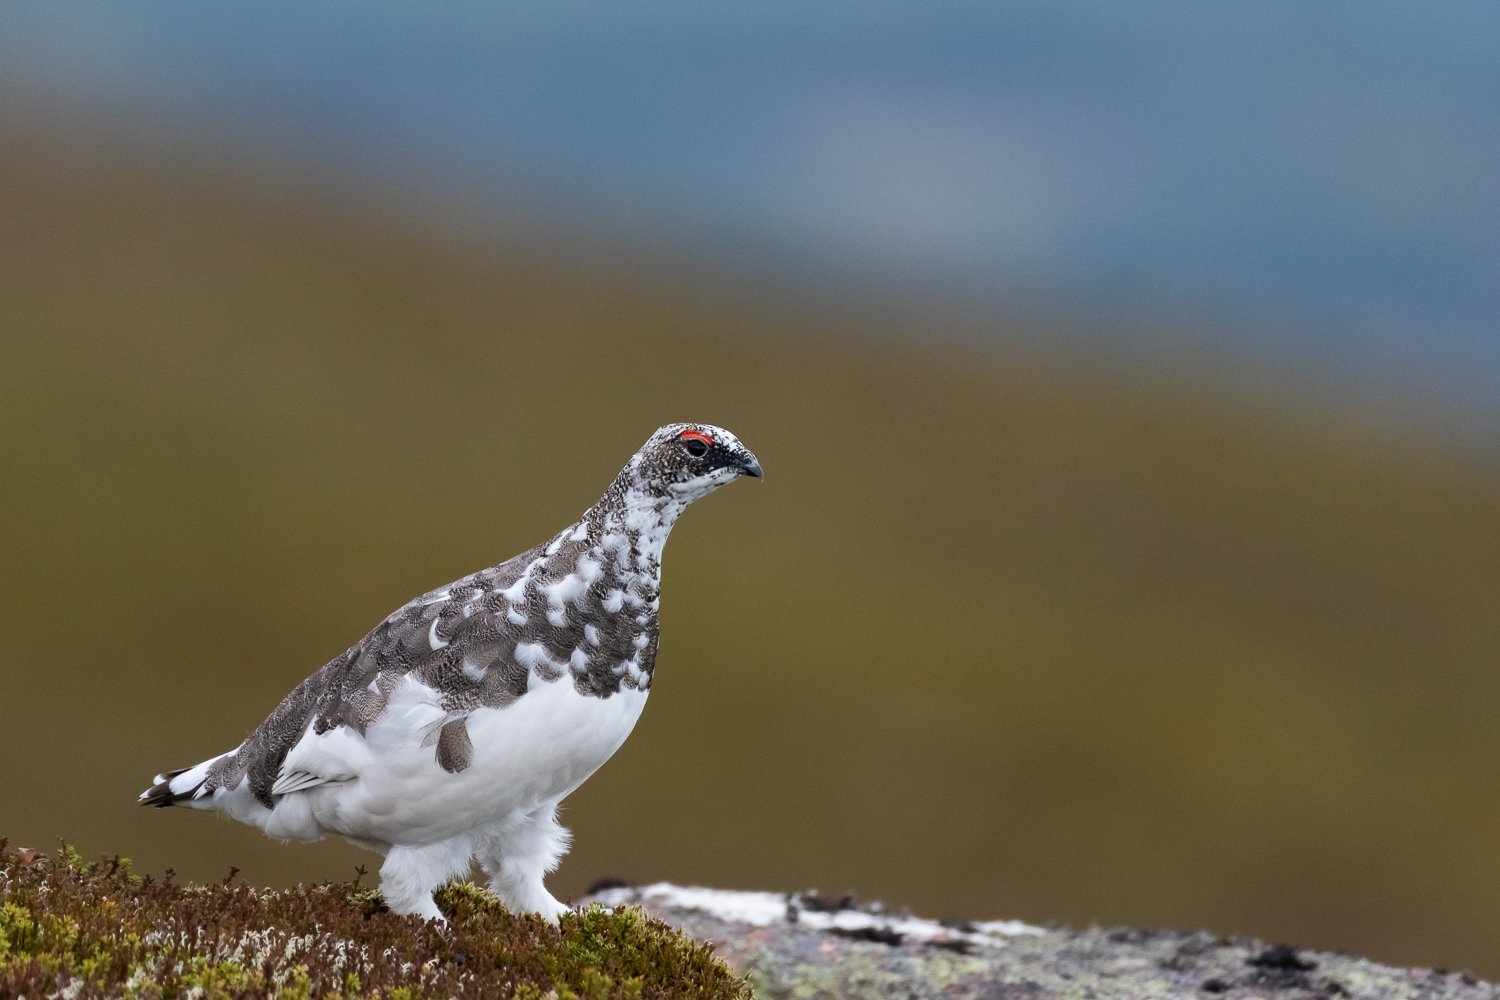 Ptarmigan walking to the right